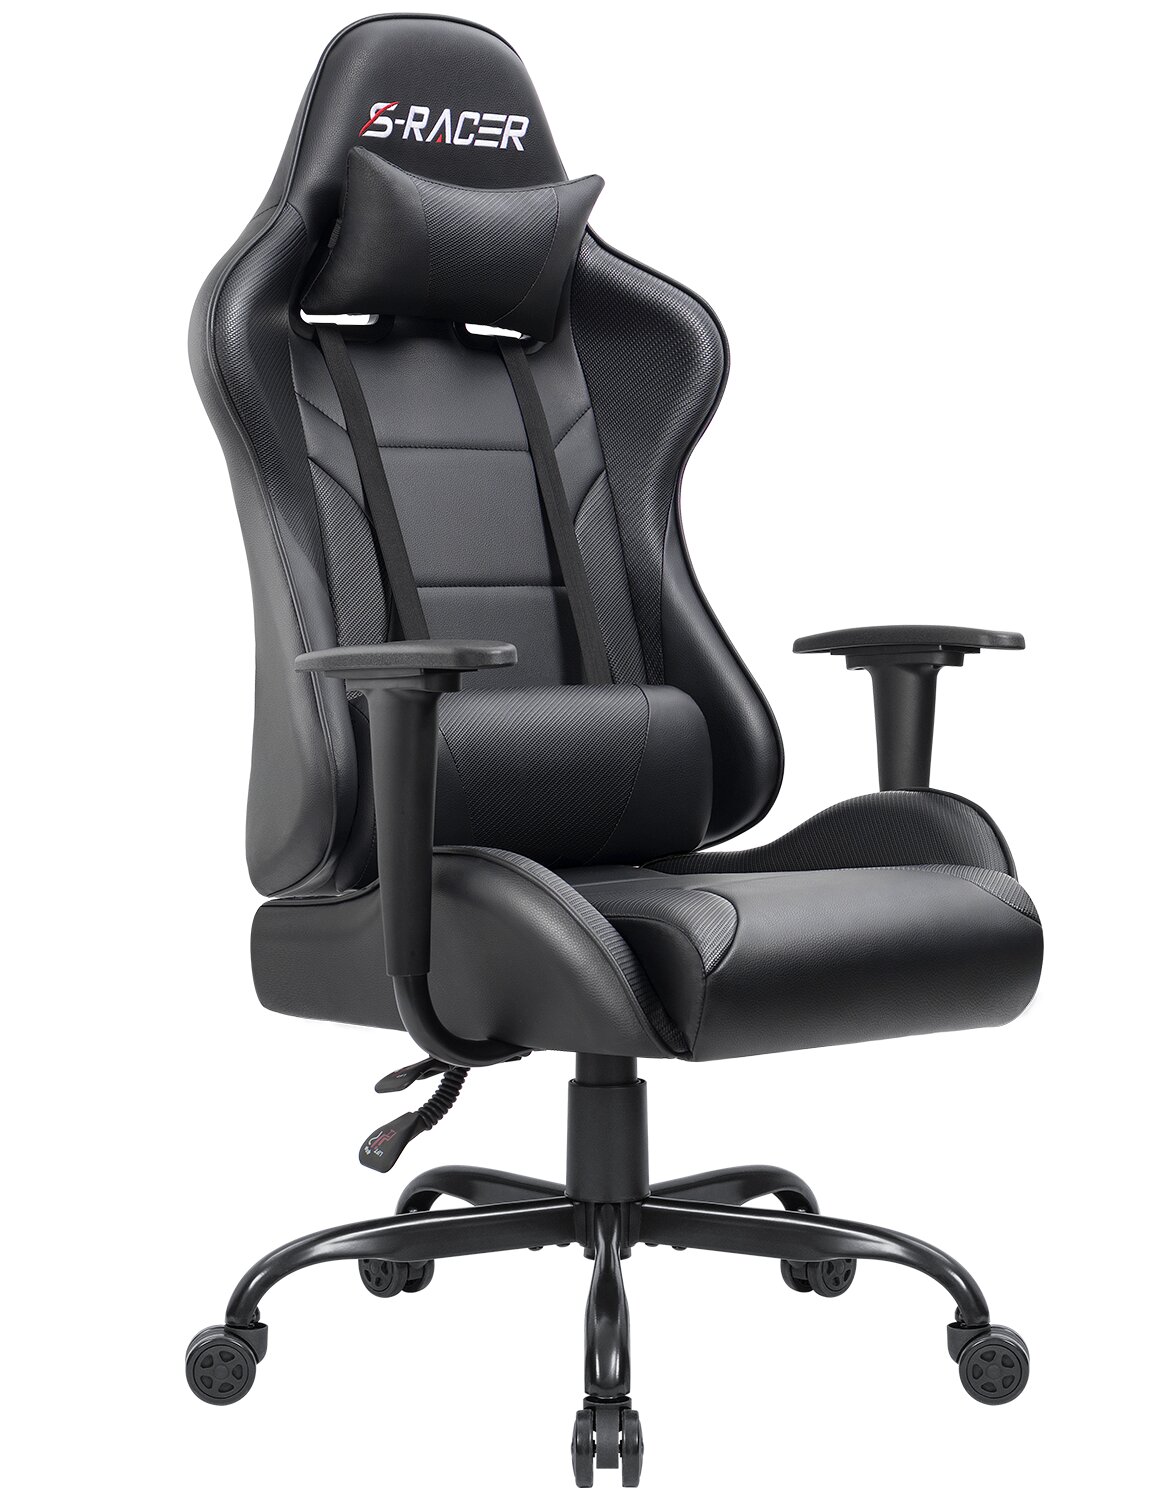 High Back Race Car Style Bucket Seat Office Desk Chair Gaming Chair Black New 